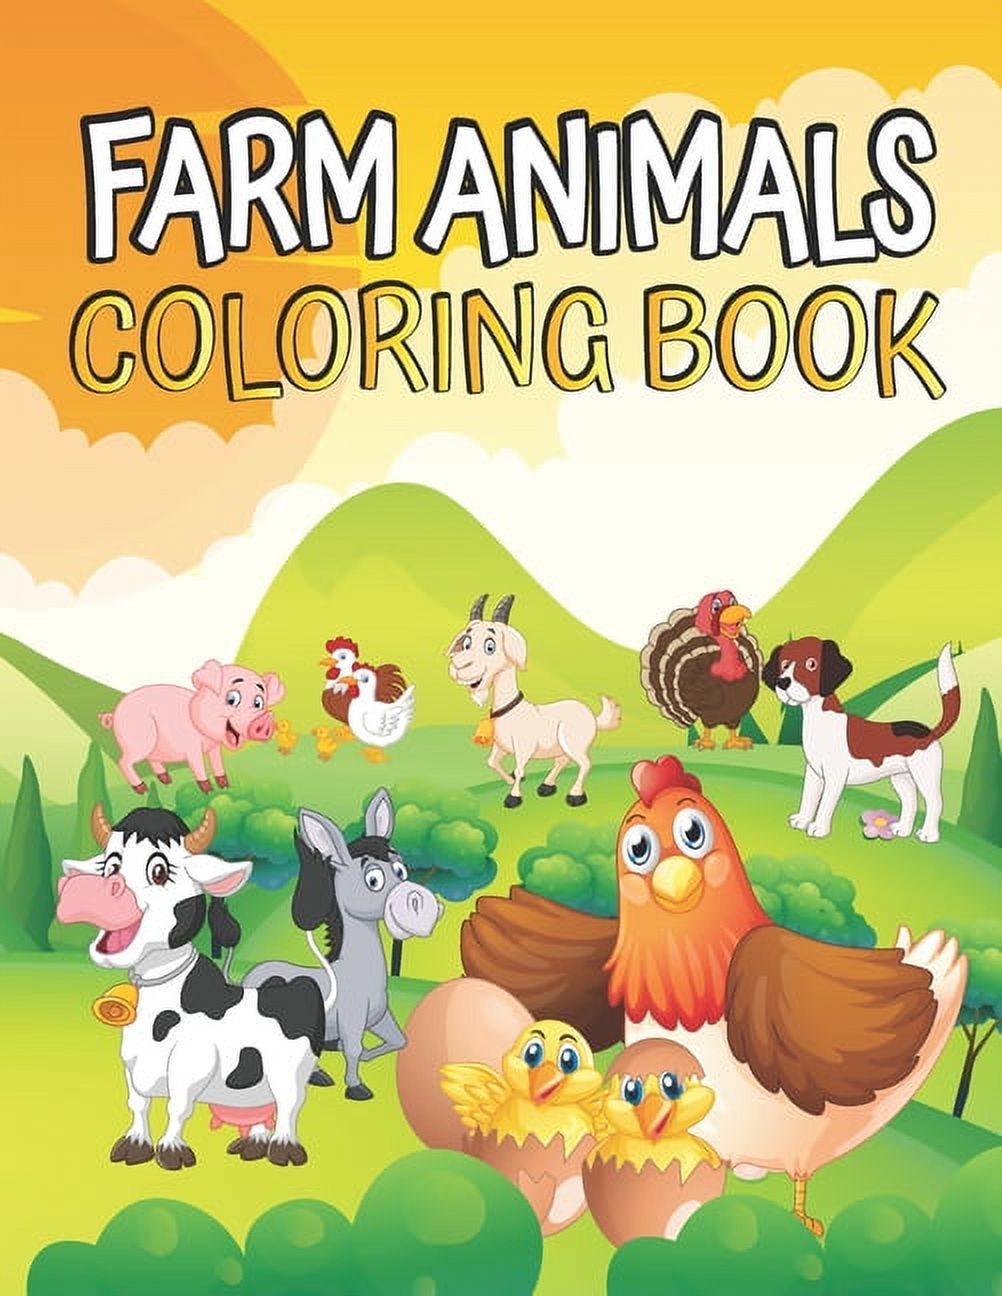 Farm Animals Coloring book: Farm Animals Coloring Book for Toddlers Ages 2-4 - Cow Horse Chicken Pig and Many More - Big Simple and Fun Designs Farm Animals Learn and Coloring Book, (Paperback) - image 1 of 1